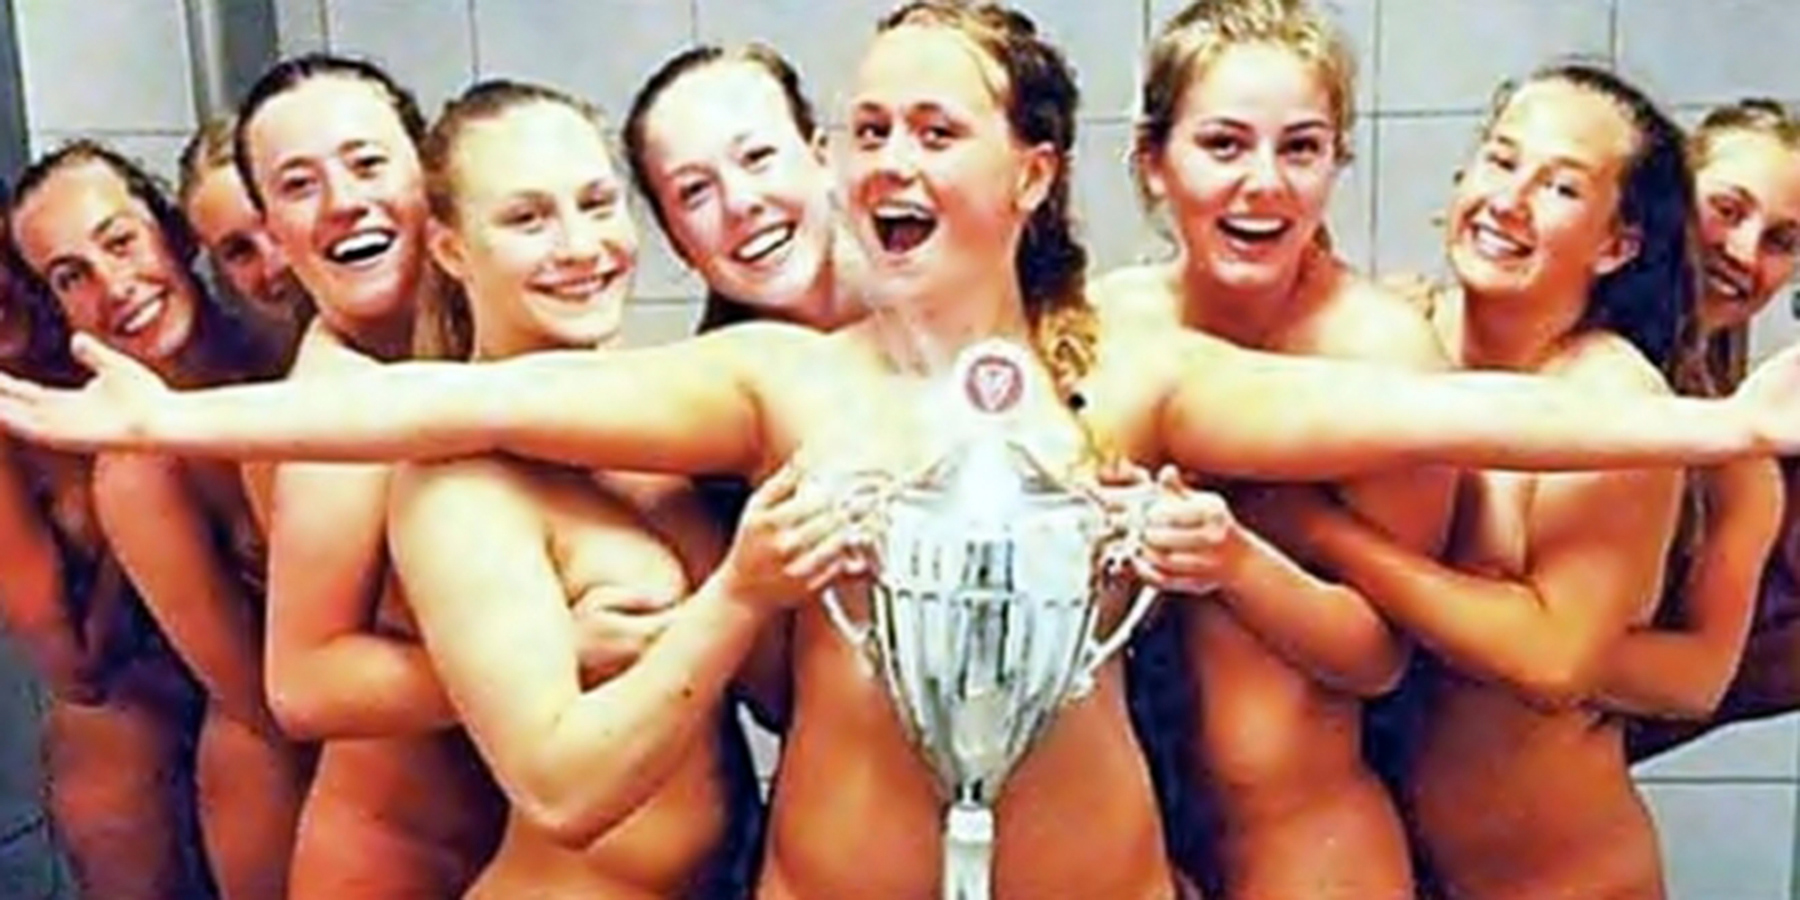 amanda hoodie recommends naked women soccer team pic